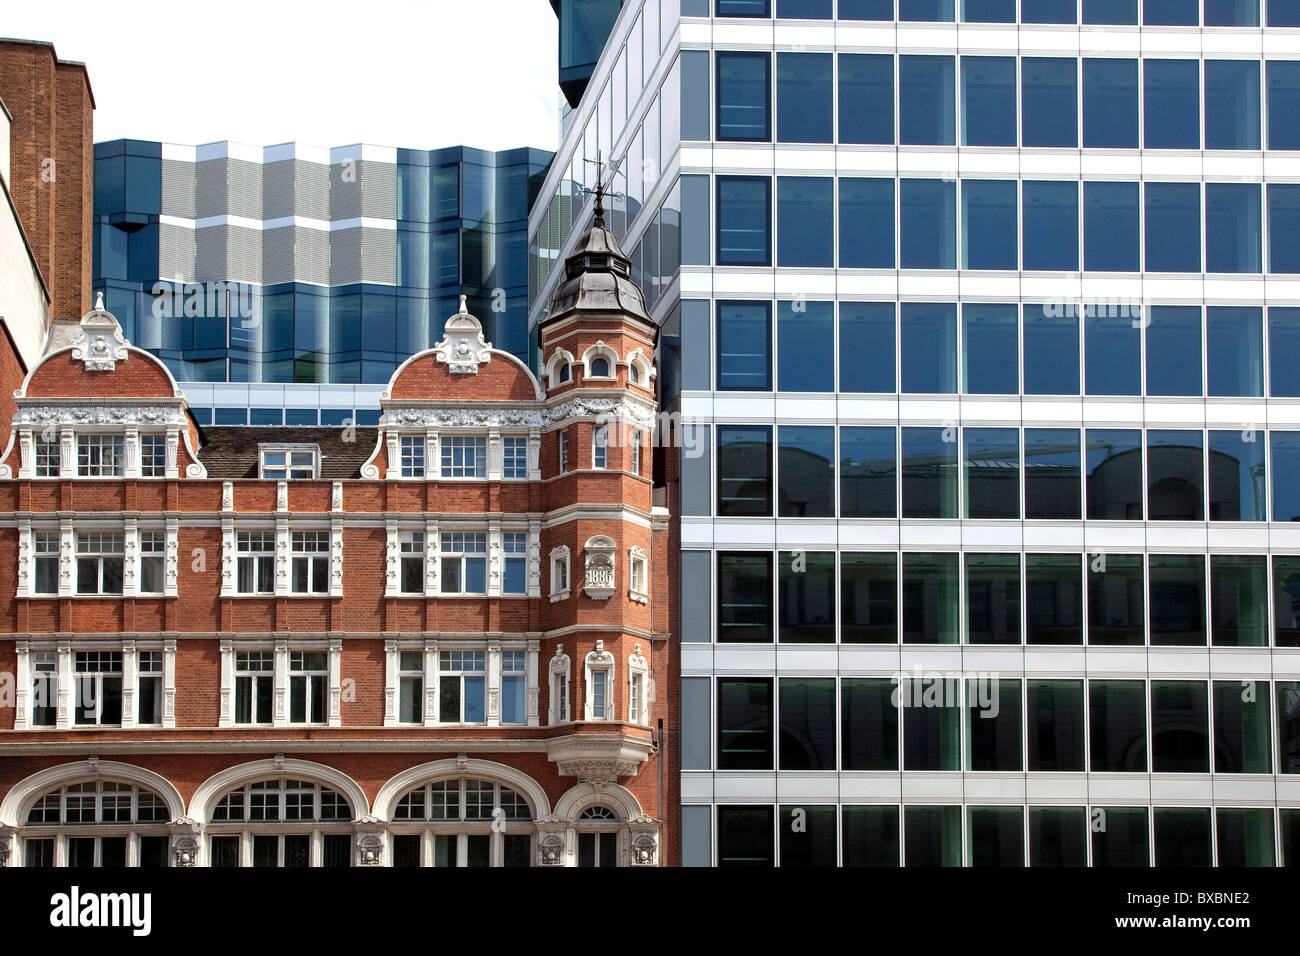 Victorian-style brick building and modern architecture in London, England, United Kingdom, Europe Stock Photo